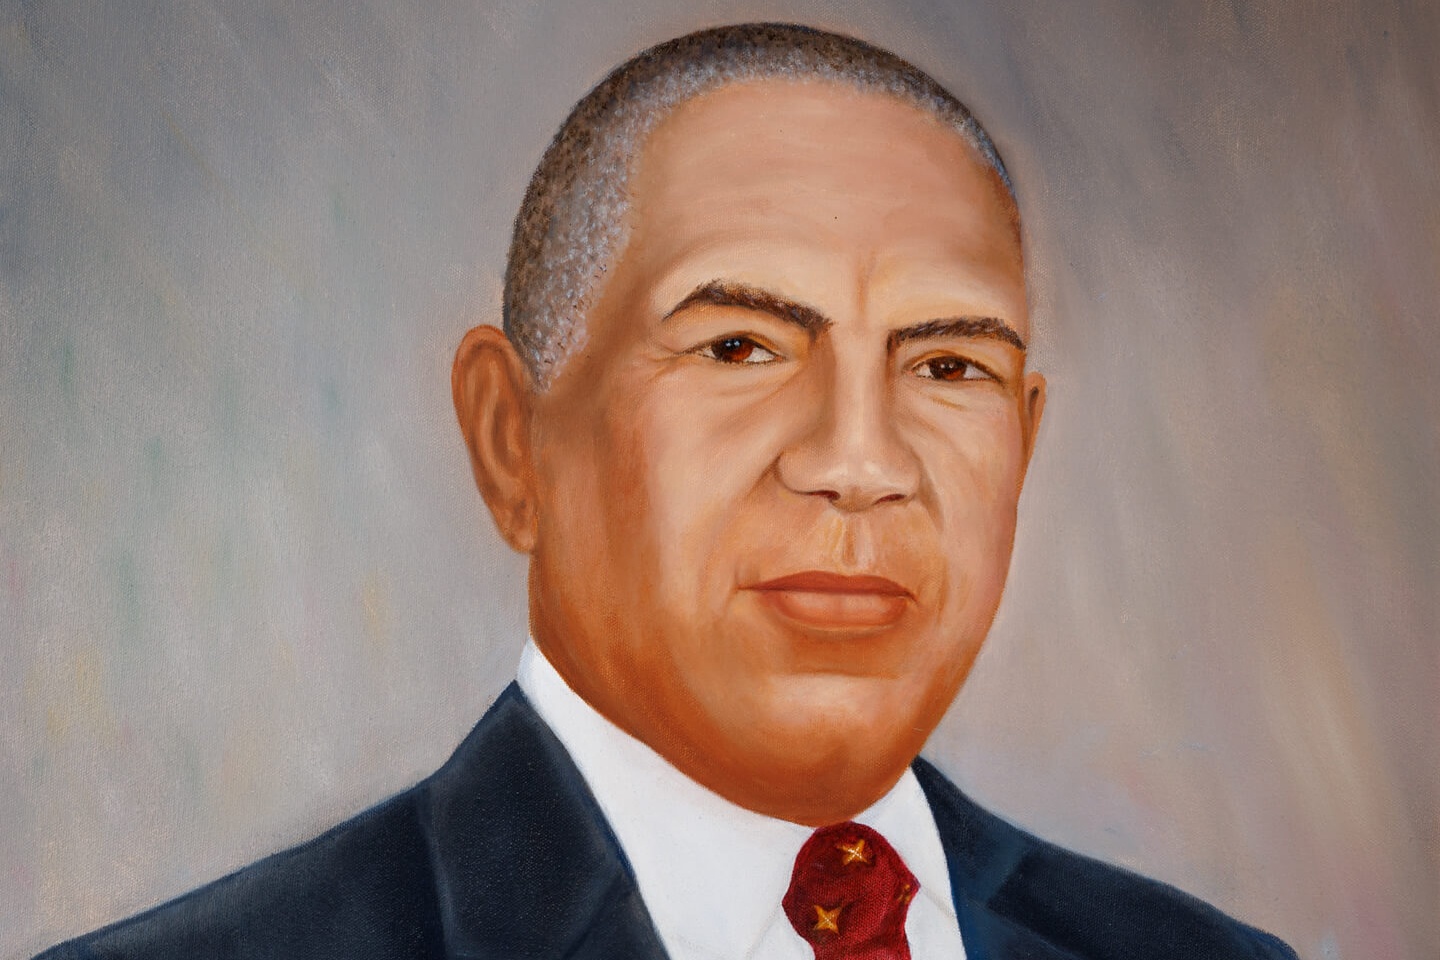 Percy Hunter Stone, the first Black 4-H state leader in Georgia, was inducted into the National 4-H Hall of Fame in 2022.